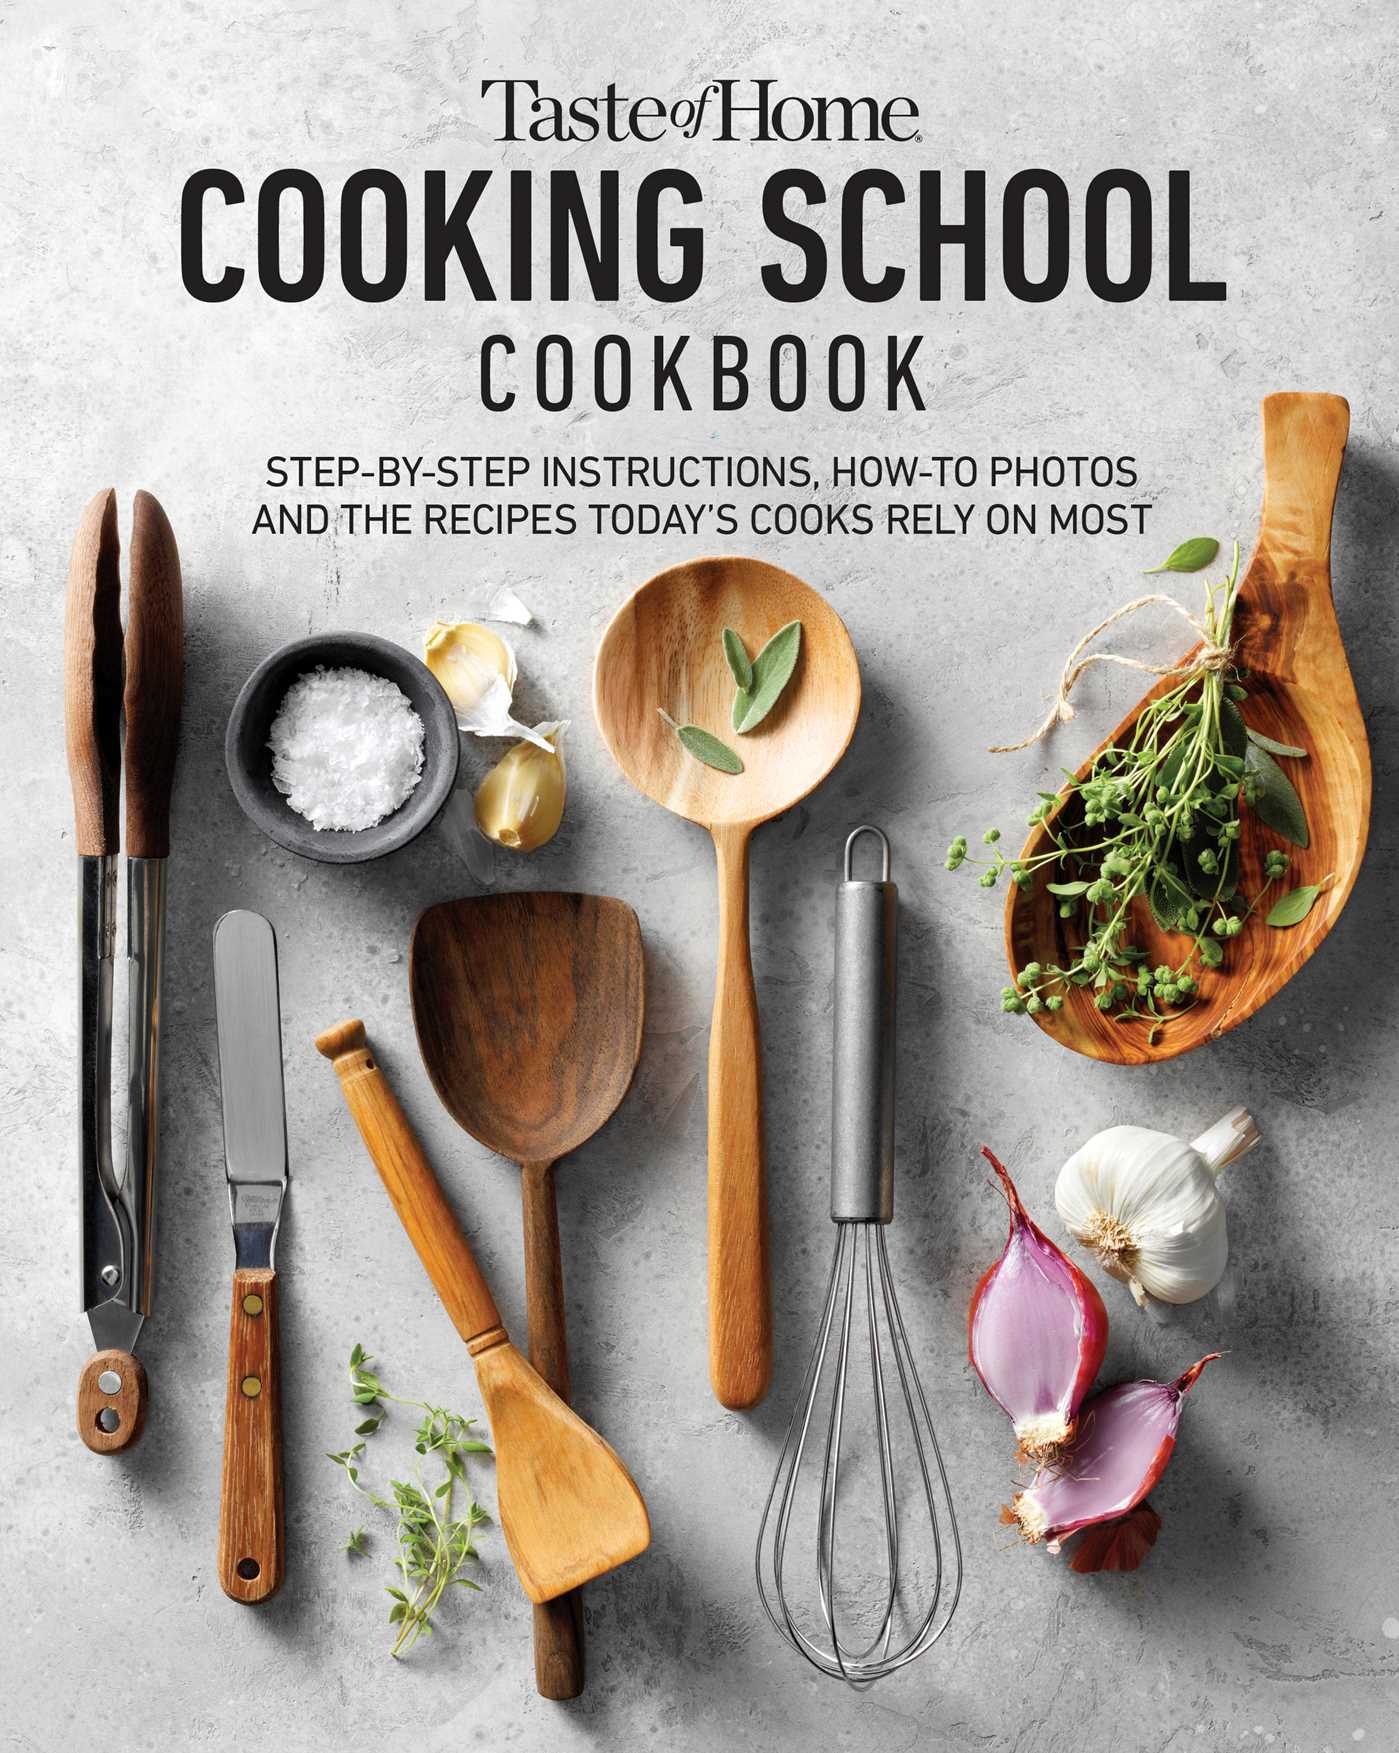 Taste of Home Cooking School Cookbook : Step-by-Step Instructions, How-to Photos and the Recipes Today's Home Cooks Rely on Most | Taste of Home